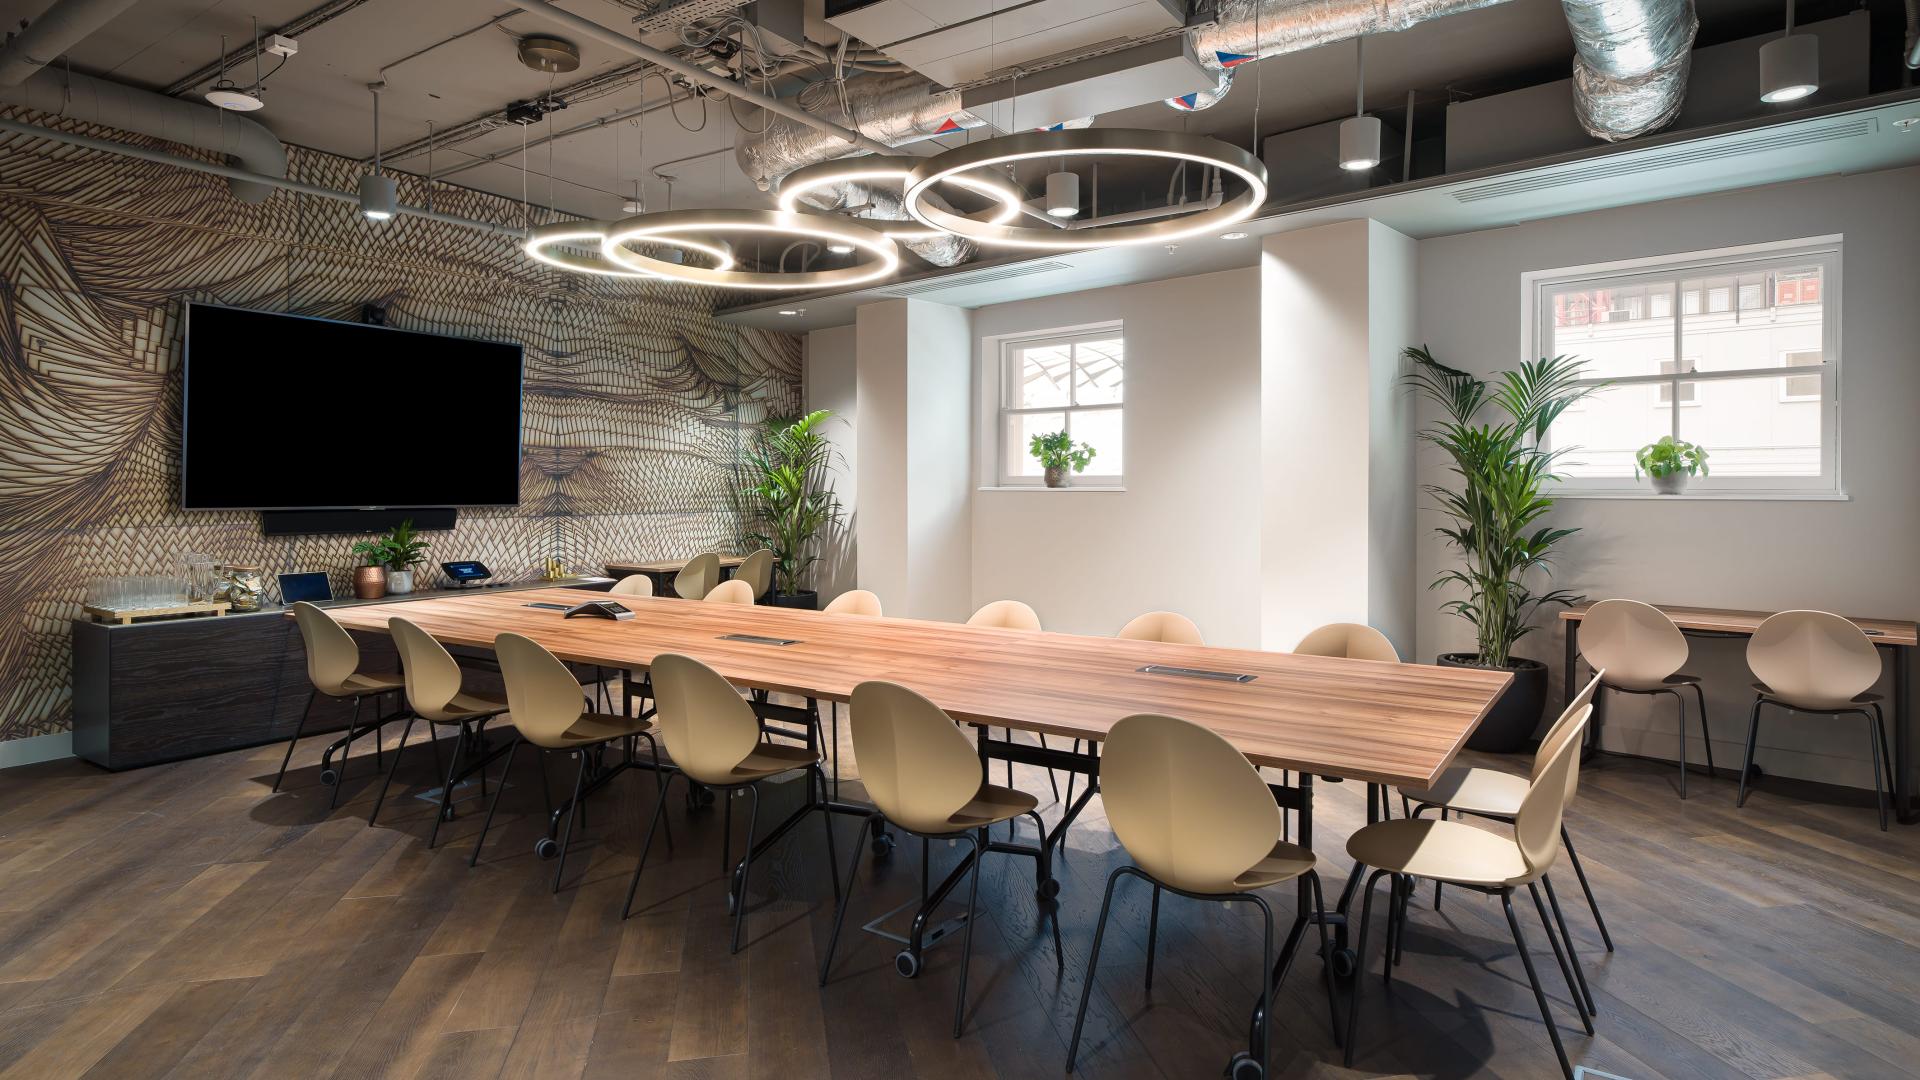 Meeting Rooms for Hire in Newham, London